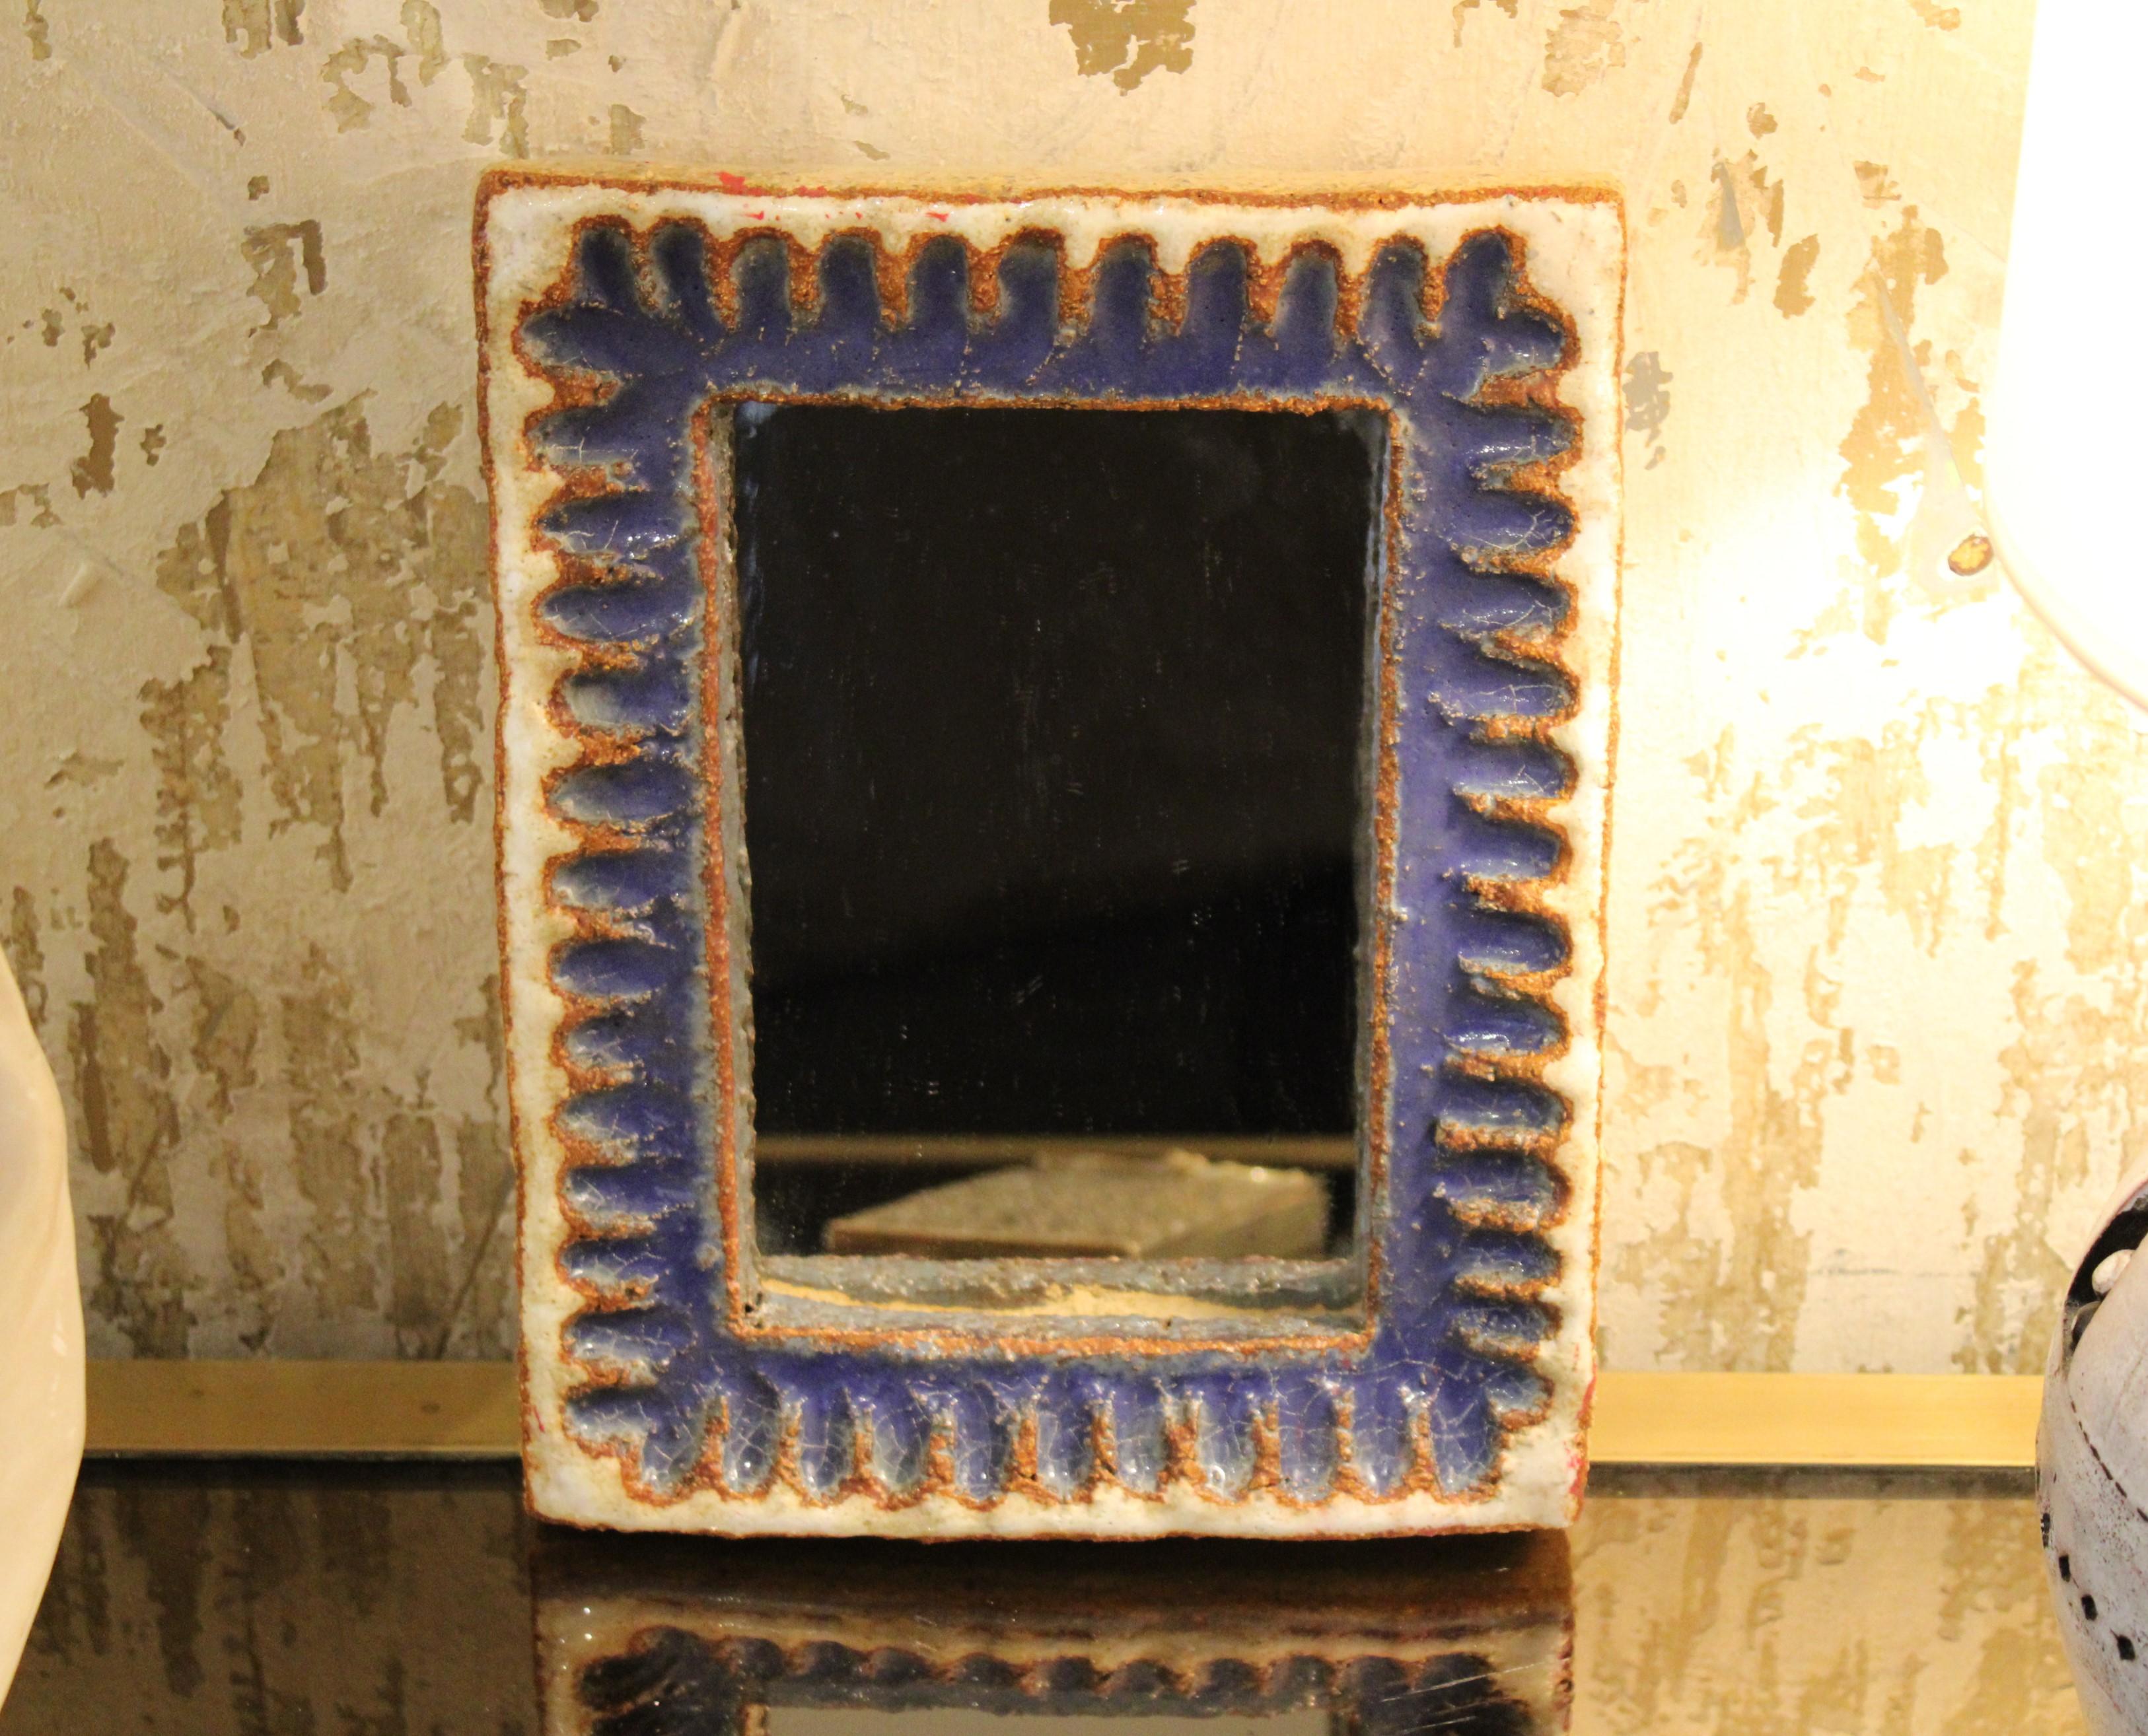 Ceramic mirror by Les Argonautes,
France, circa 1960,
Signed on the back